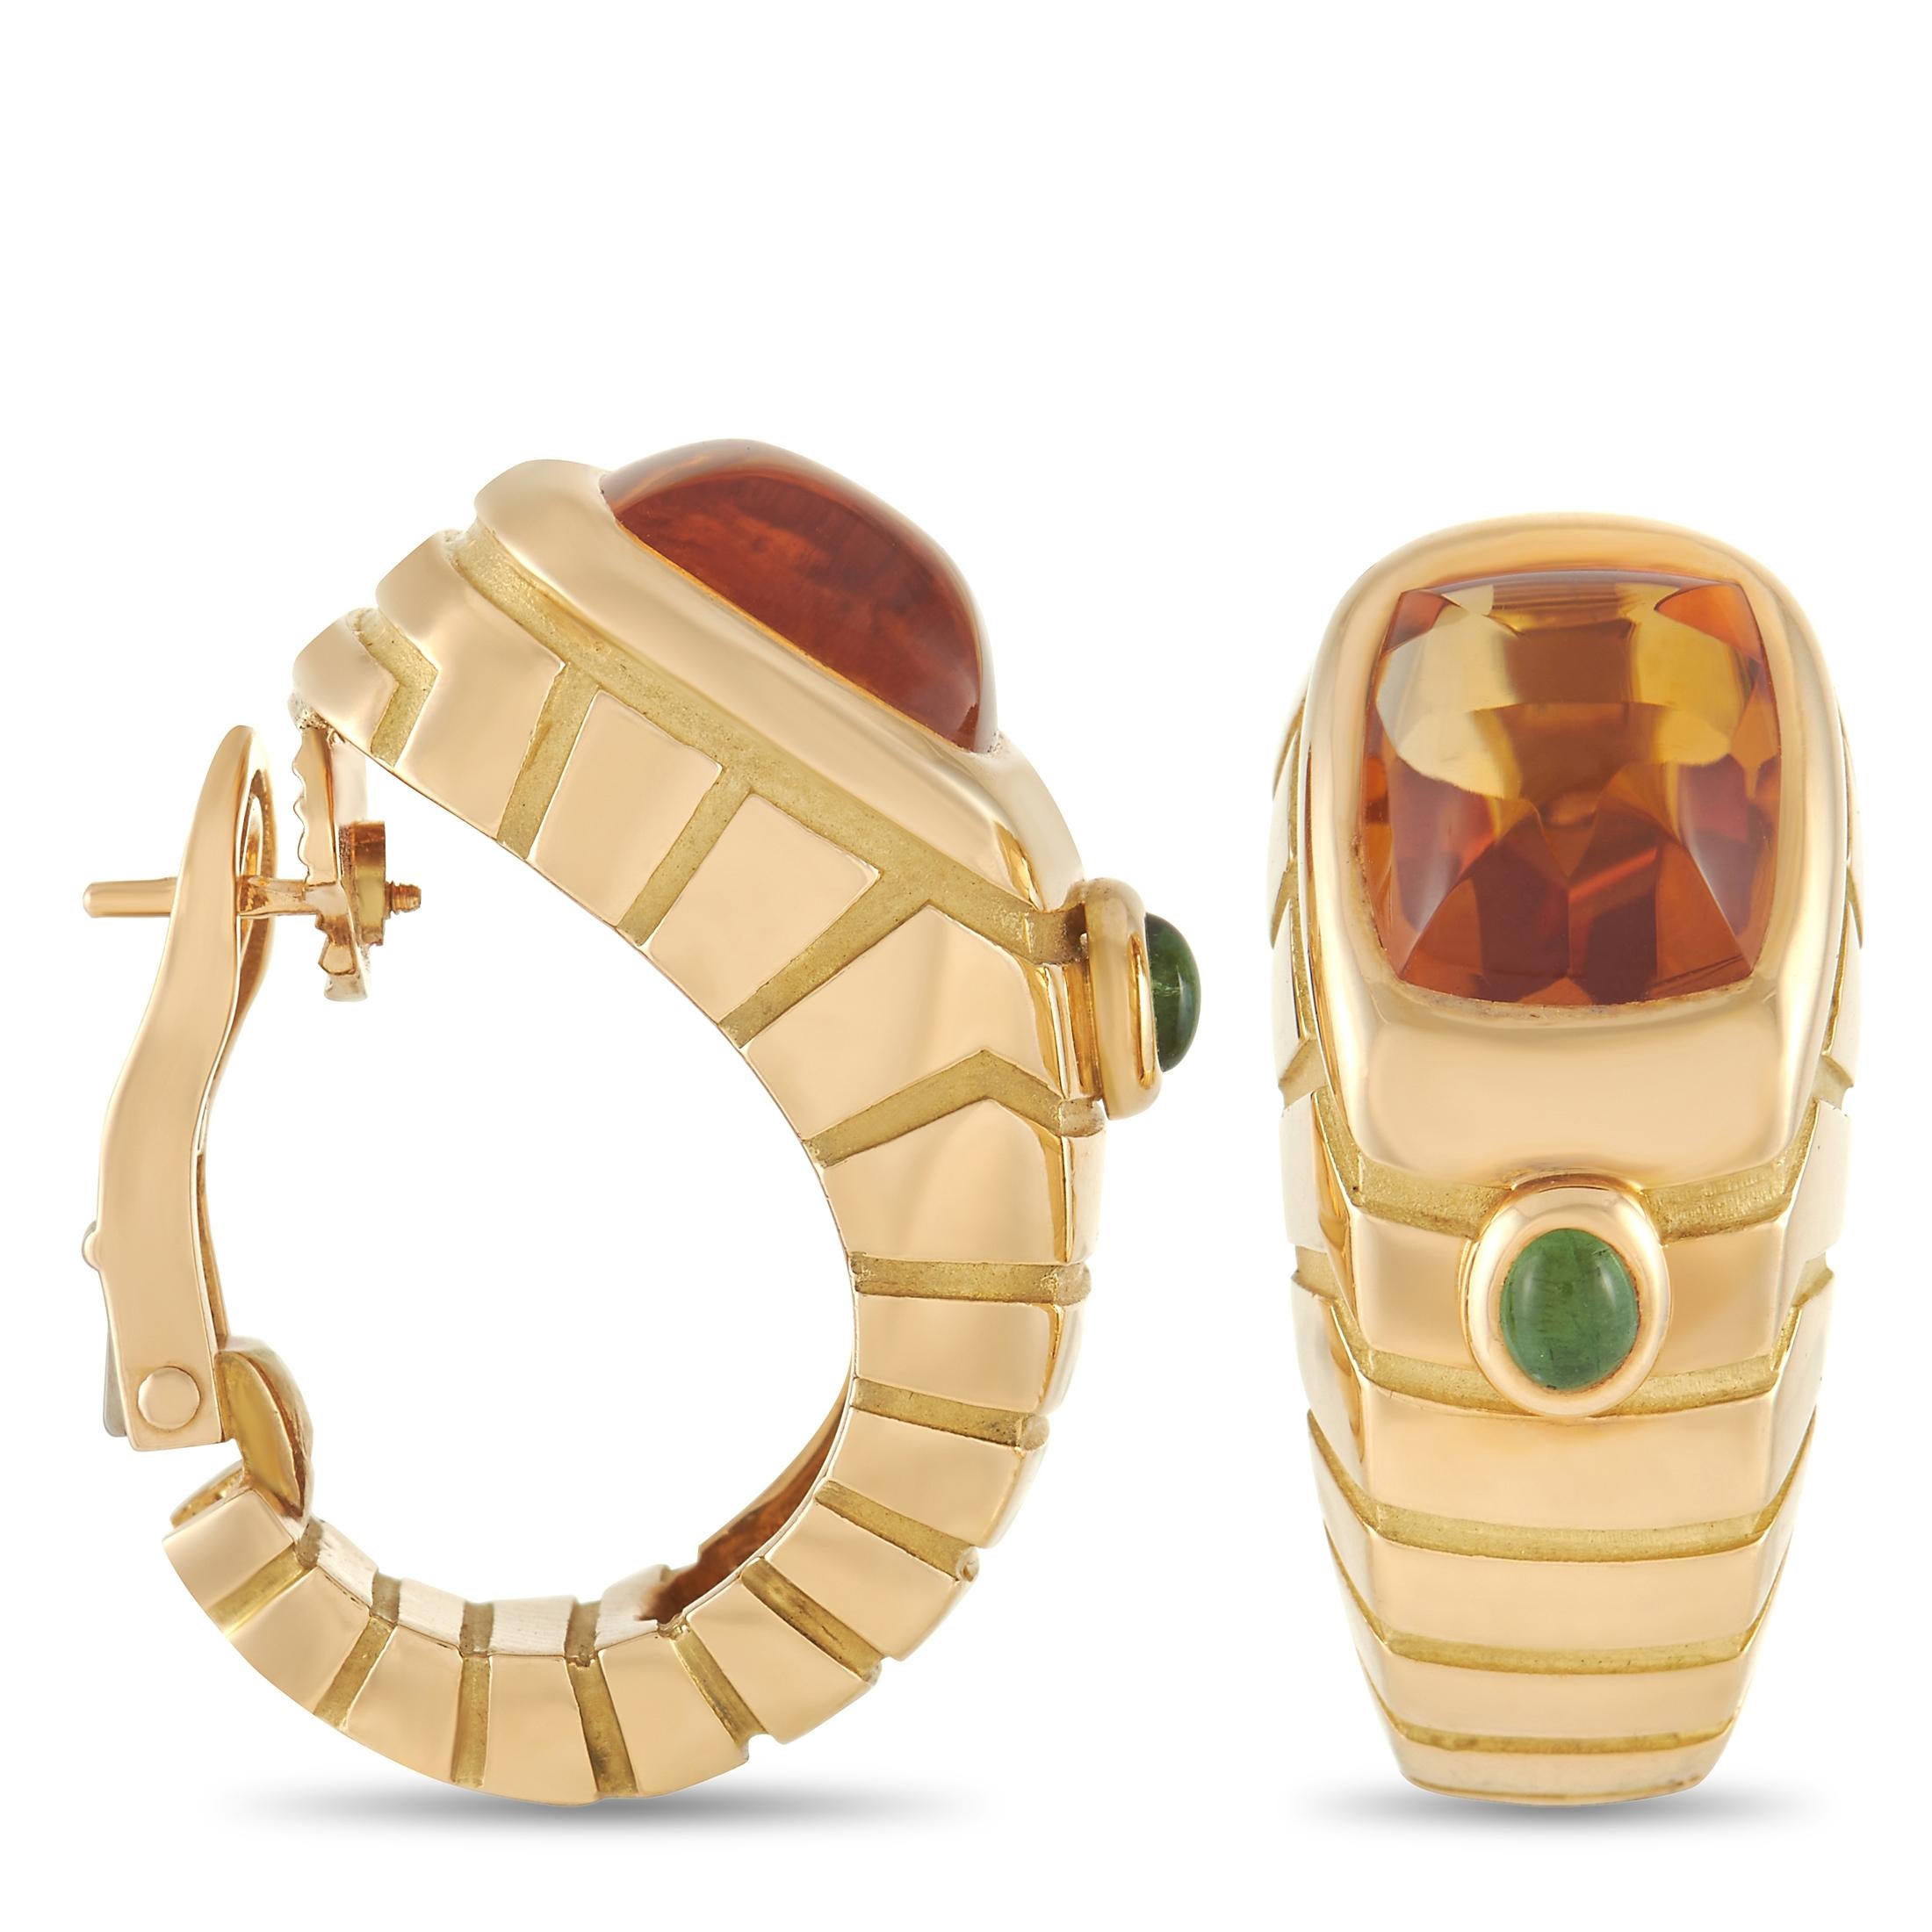 These Van Cleef & Arpels earrings command attention for all the right reasons. A striking 18K Yellow Gold setting provides the perfect foundation for an array of opulent colored gemstones, including a large Citrine gemstone and a smaller green